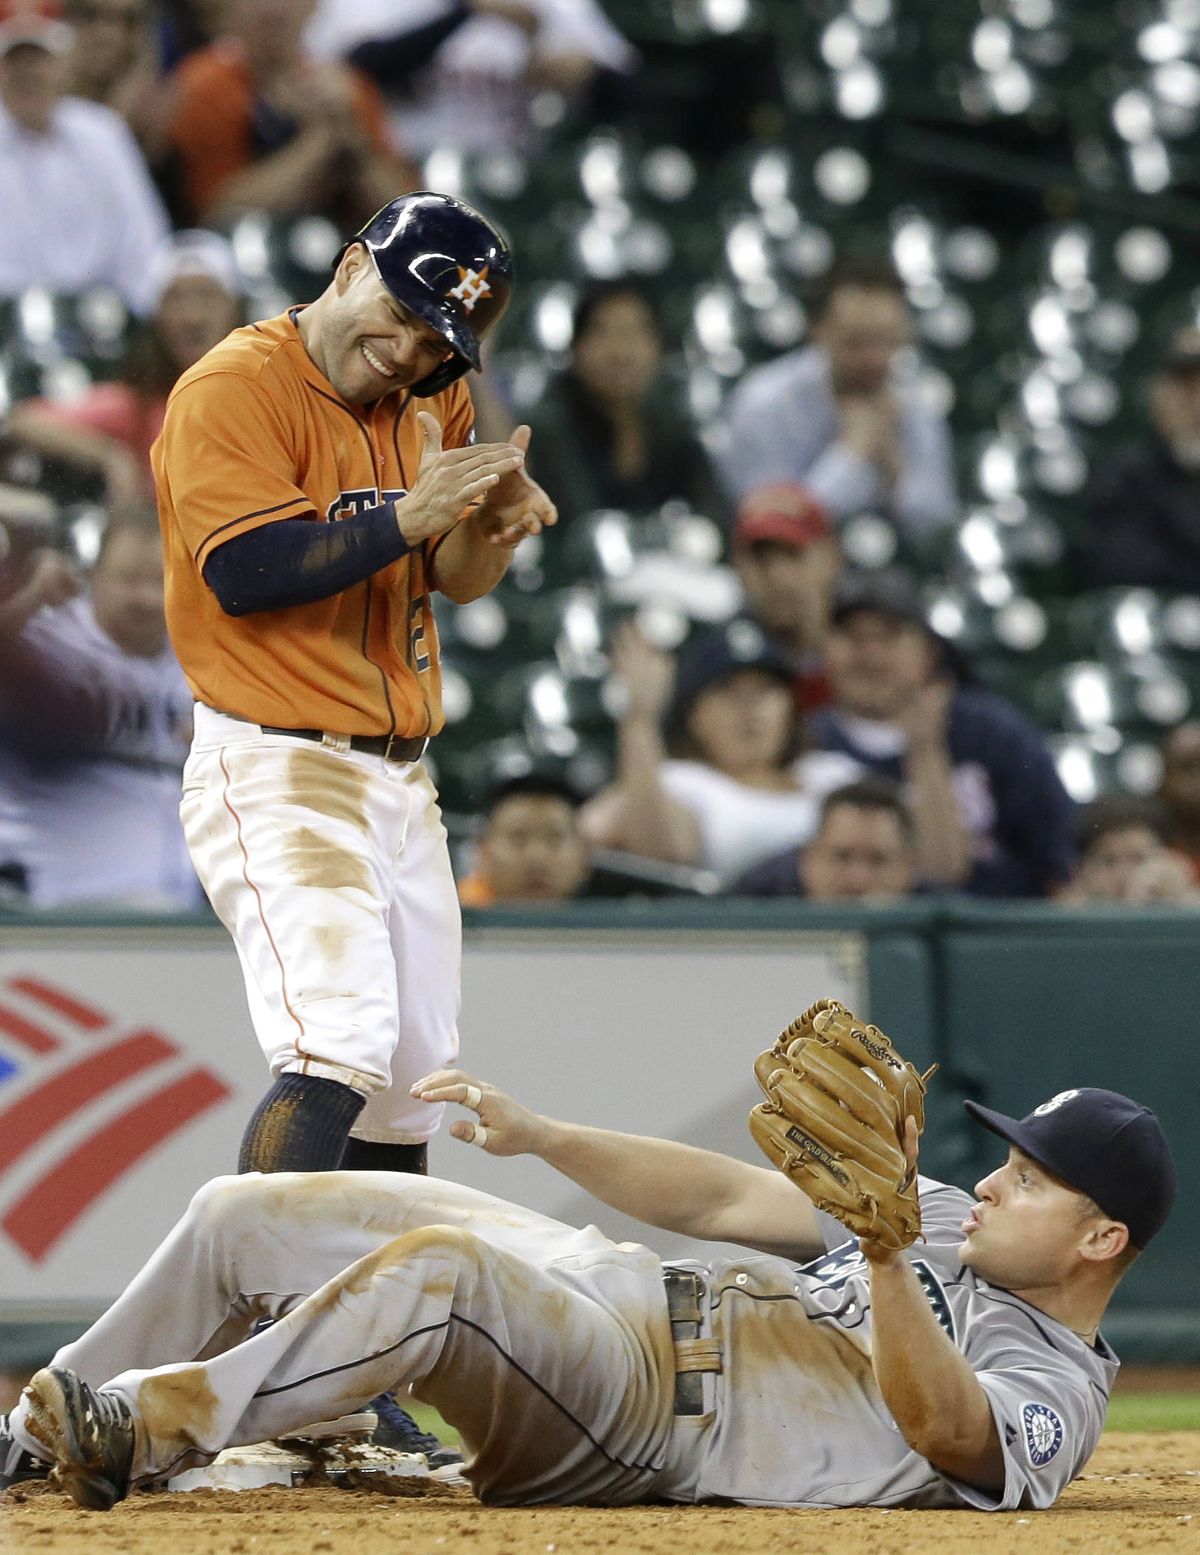 Astros’ Jose Altuve stands over Kyle Seager after beating throw to third base. (Associated Press)